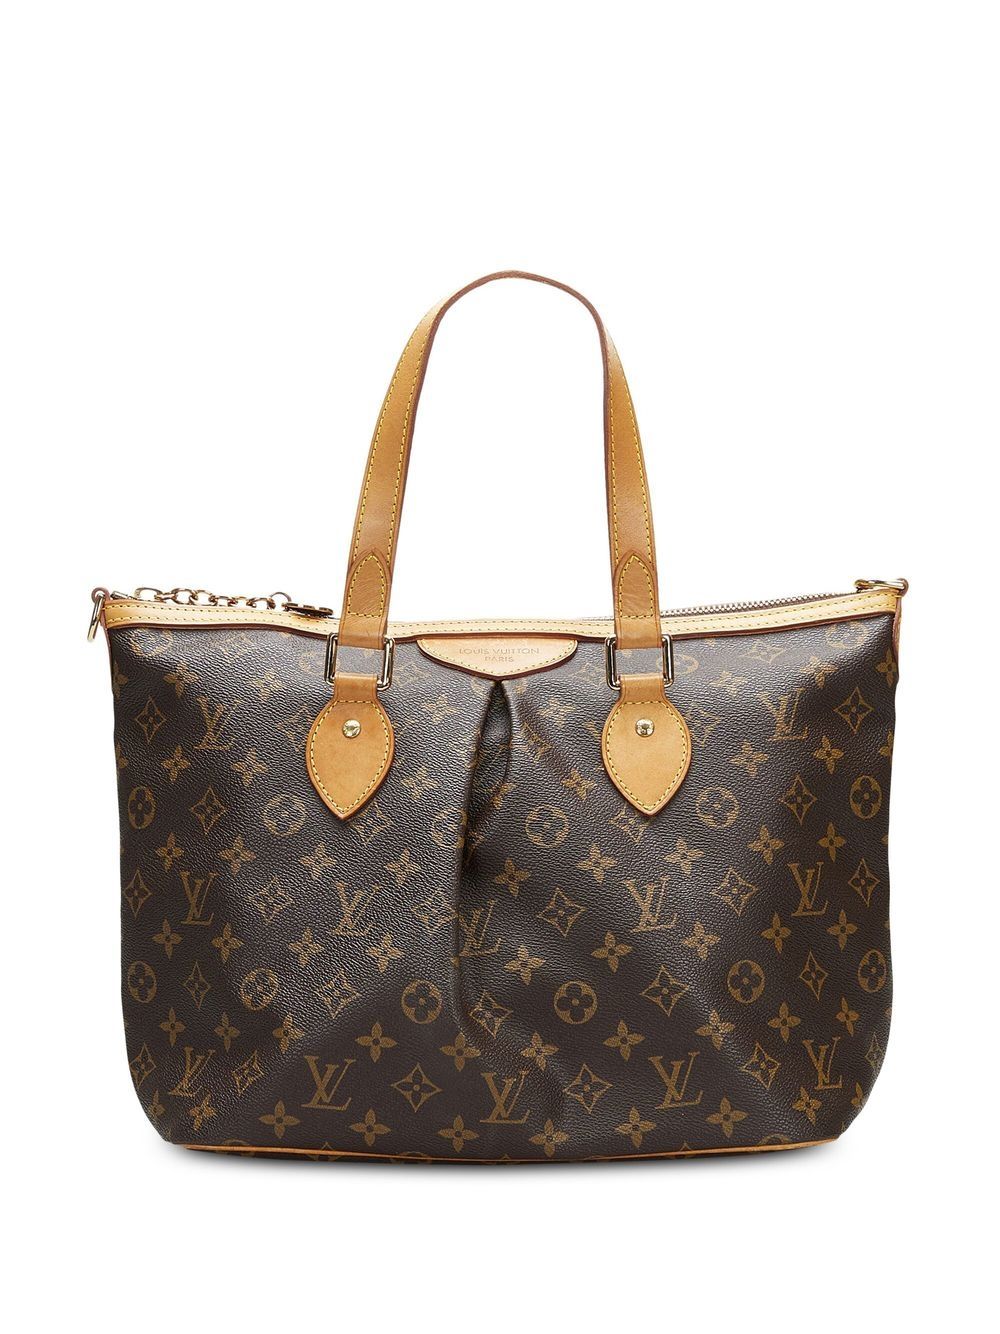 LOUIS VUITTON PALERMO Review  Why I Sold This Bag  Mod Shots  GINALVOE   YouTube